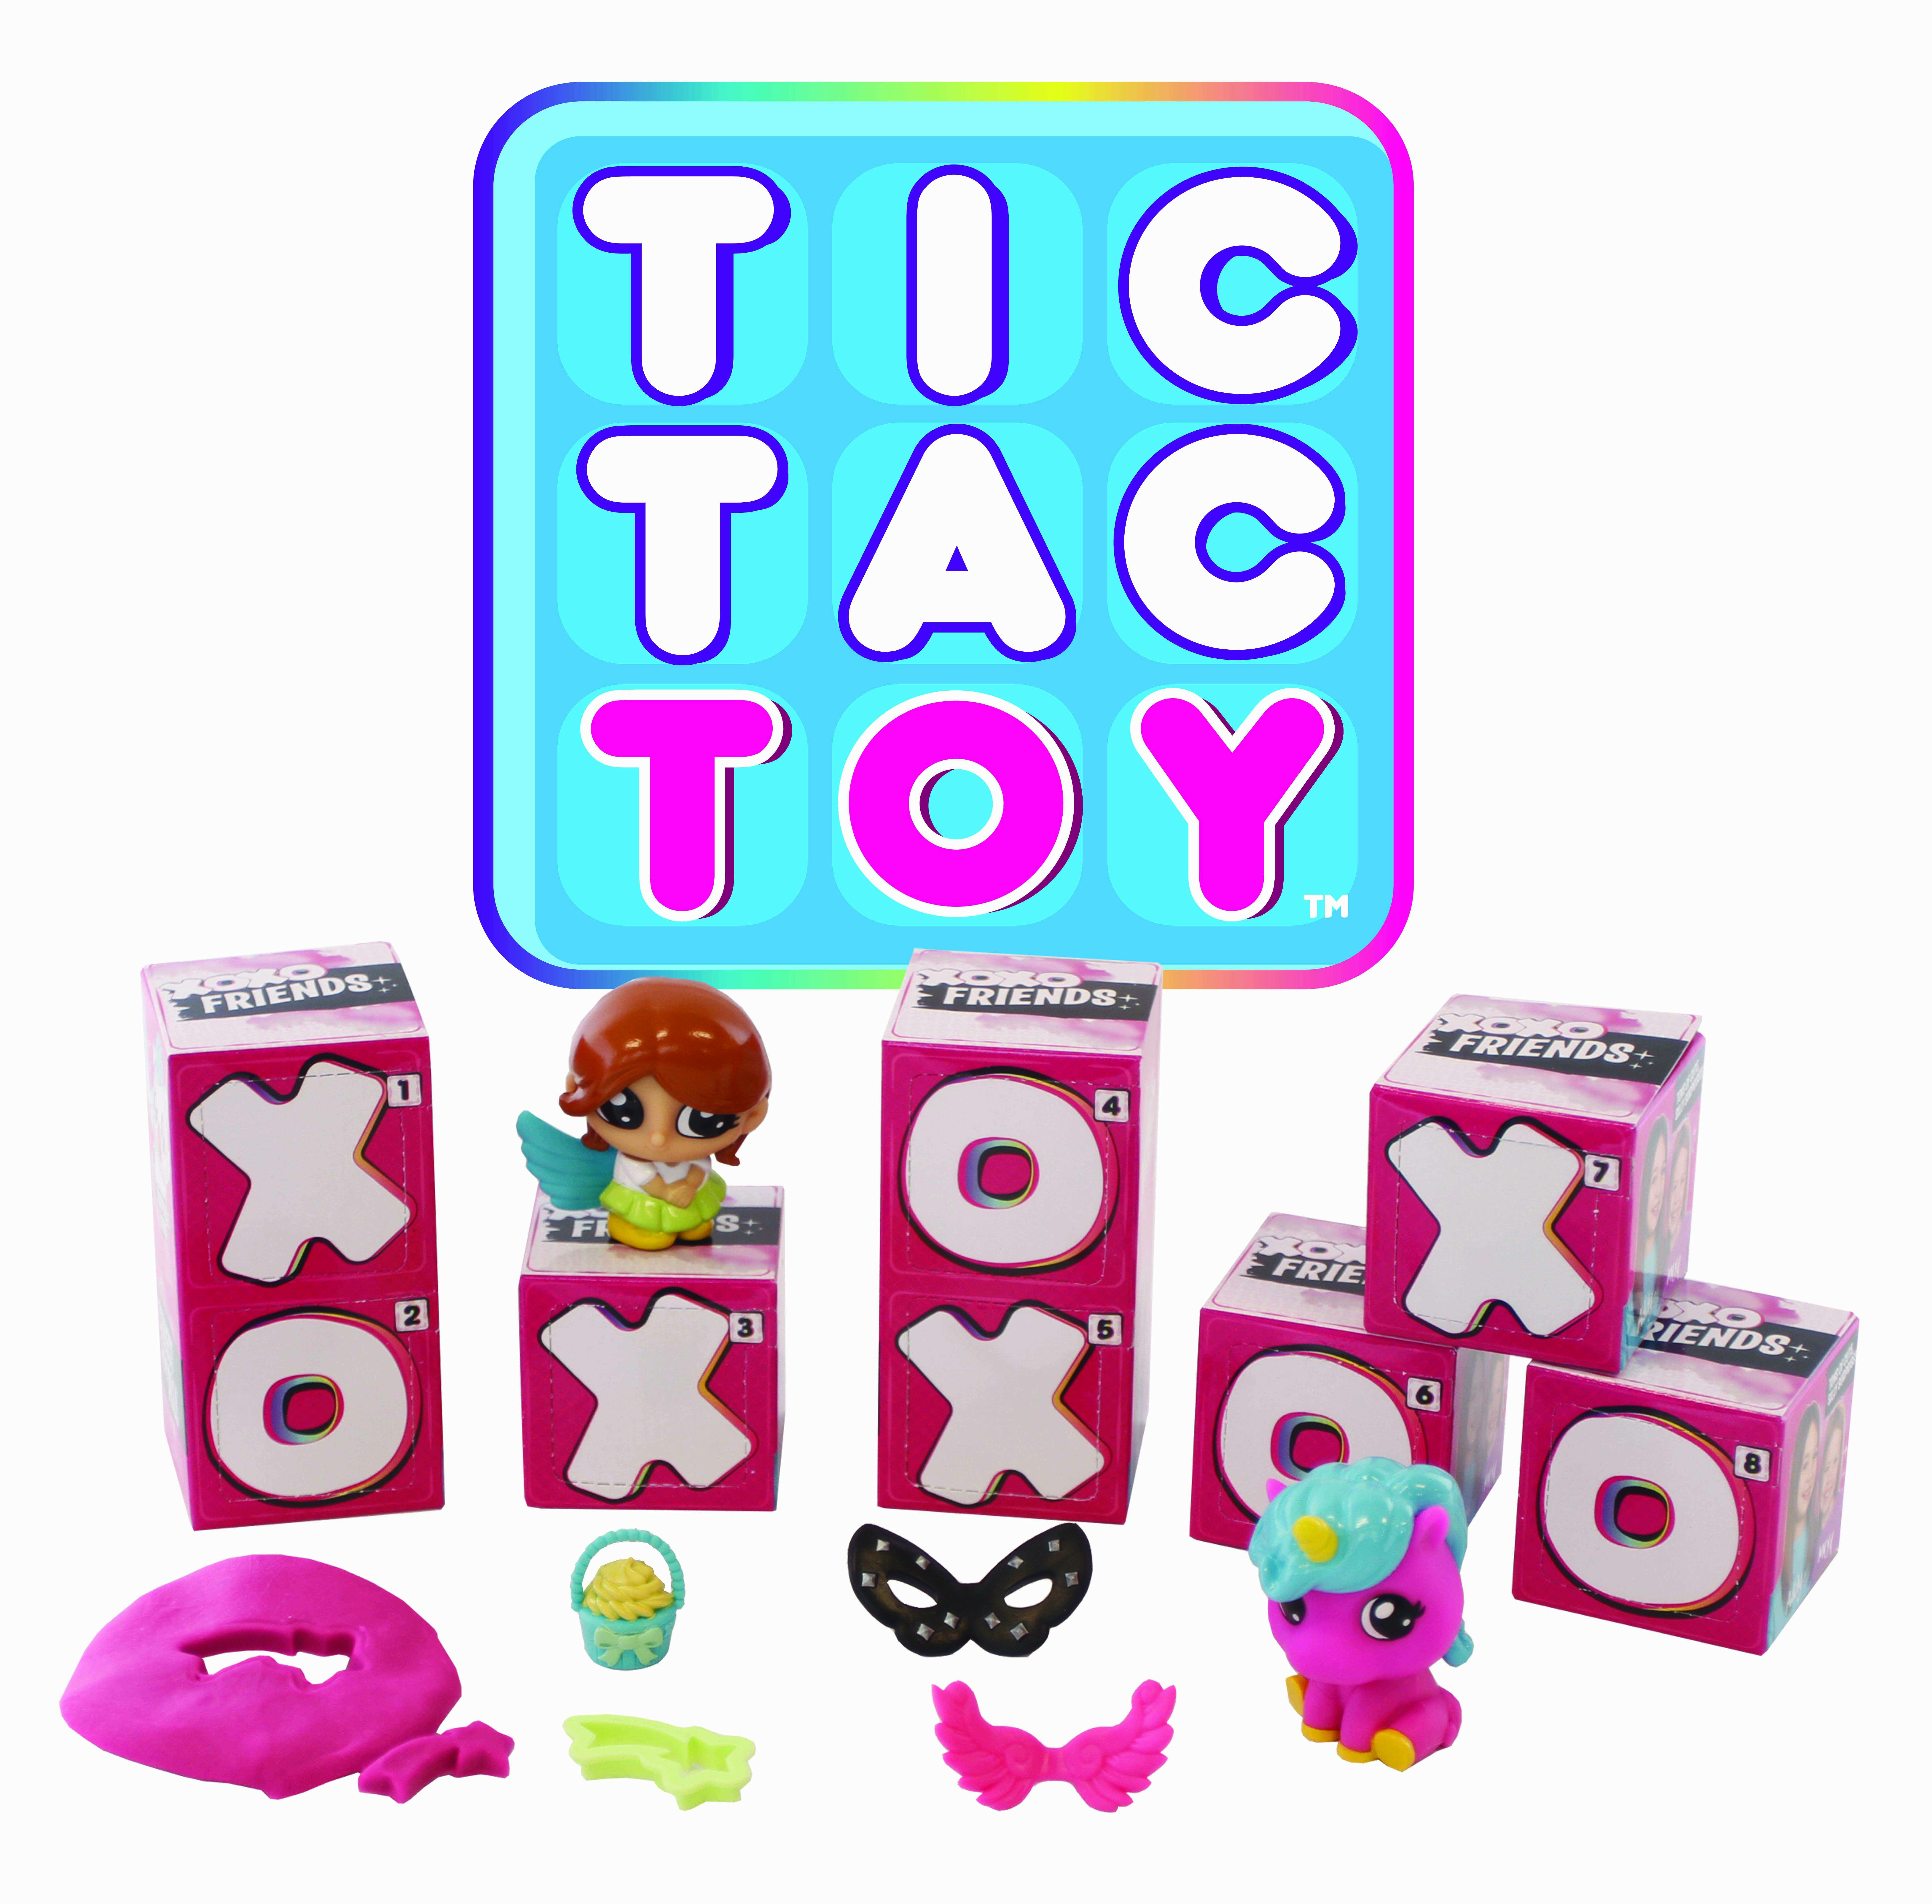 Tic Tac Toy Officially Launches XOXO Friends, XOXO Hugs Toy